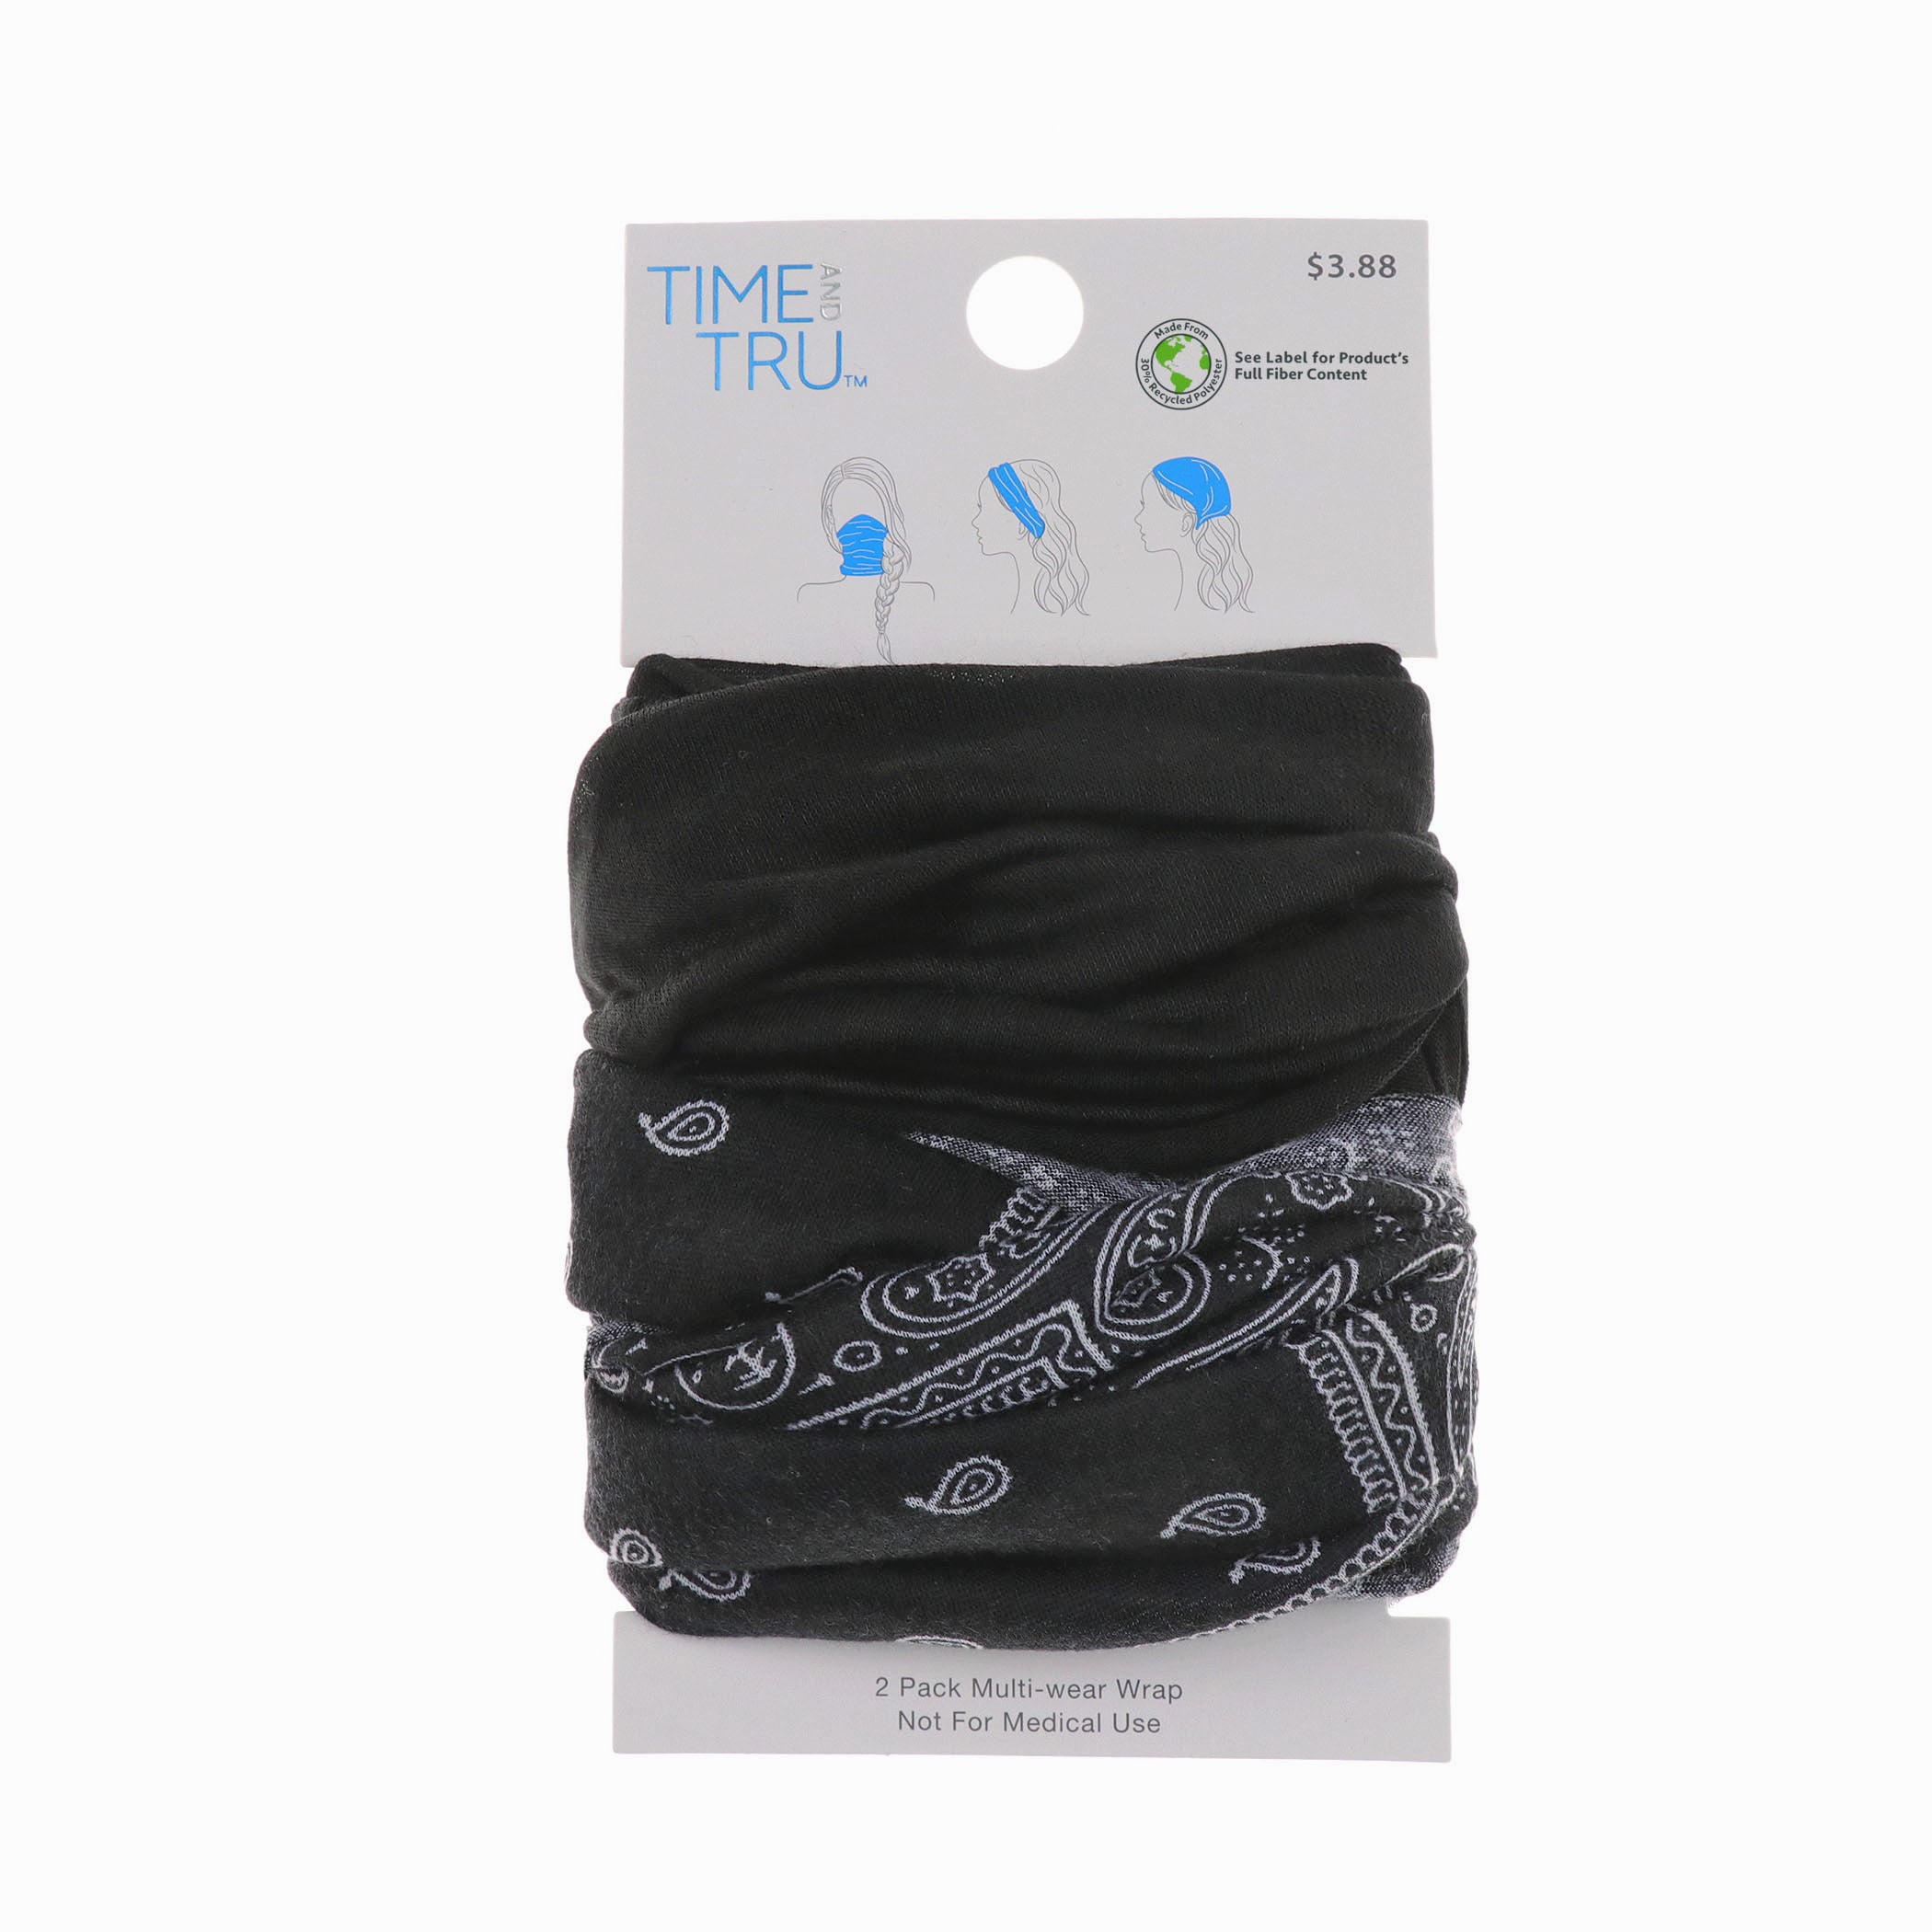 Time and Tru Multiwear Headwrap, 2-Pack (Unisex)